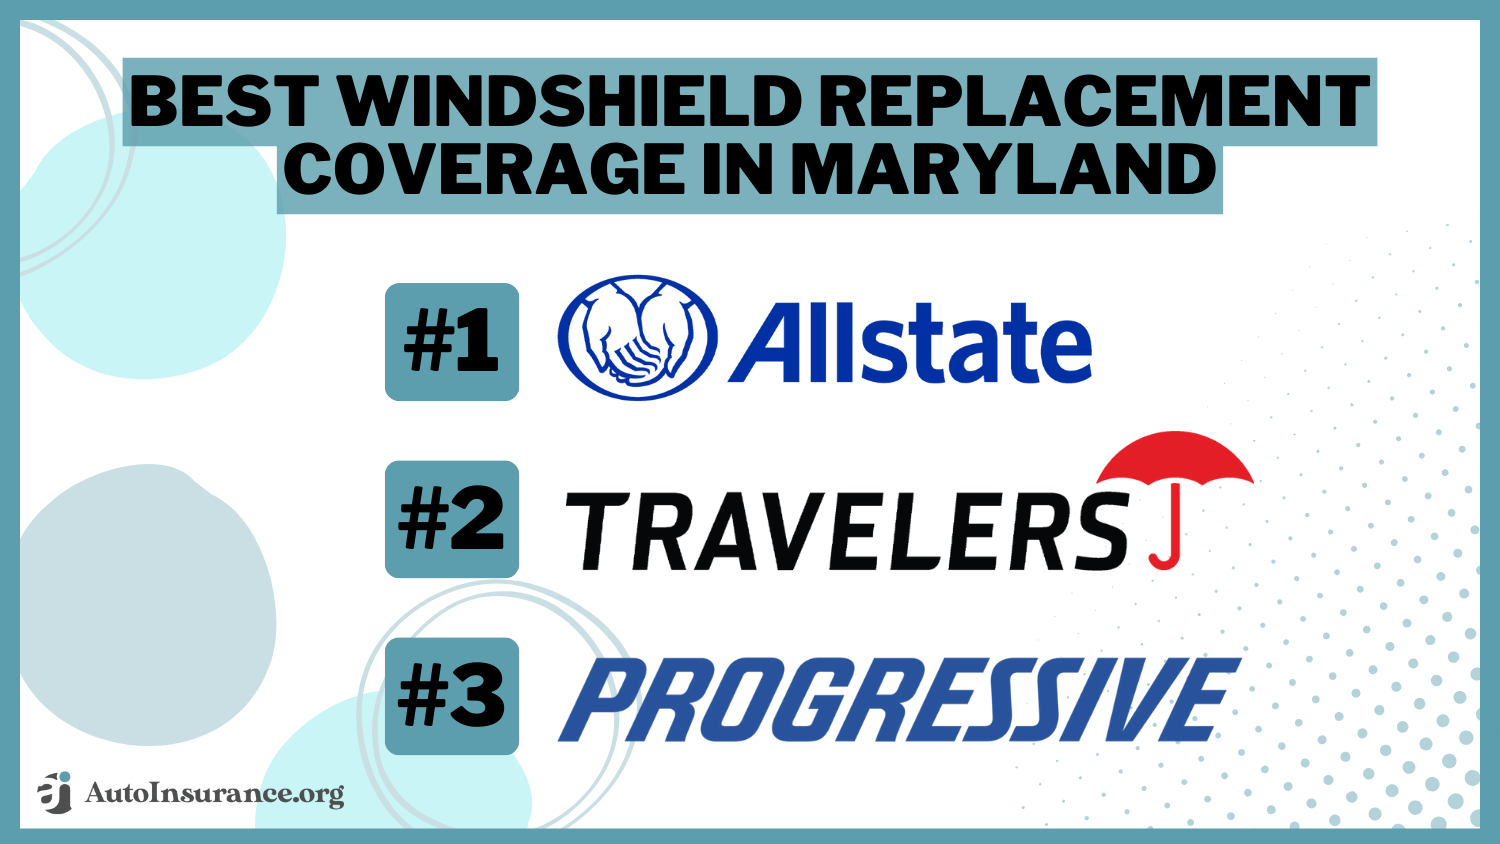 Best Windshield Replacement Coverage in Maryland: Allstate, Travelers, and Progressive